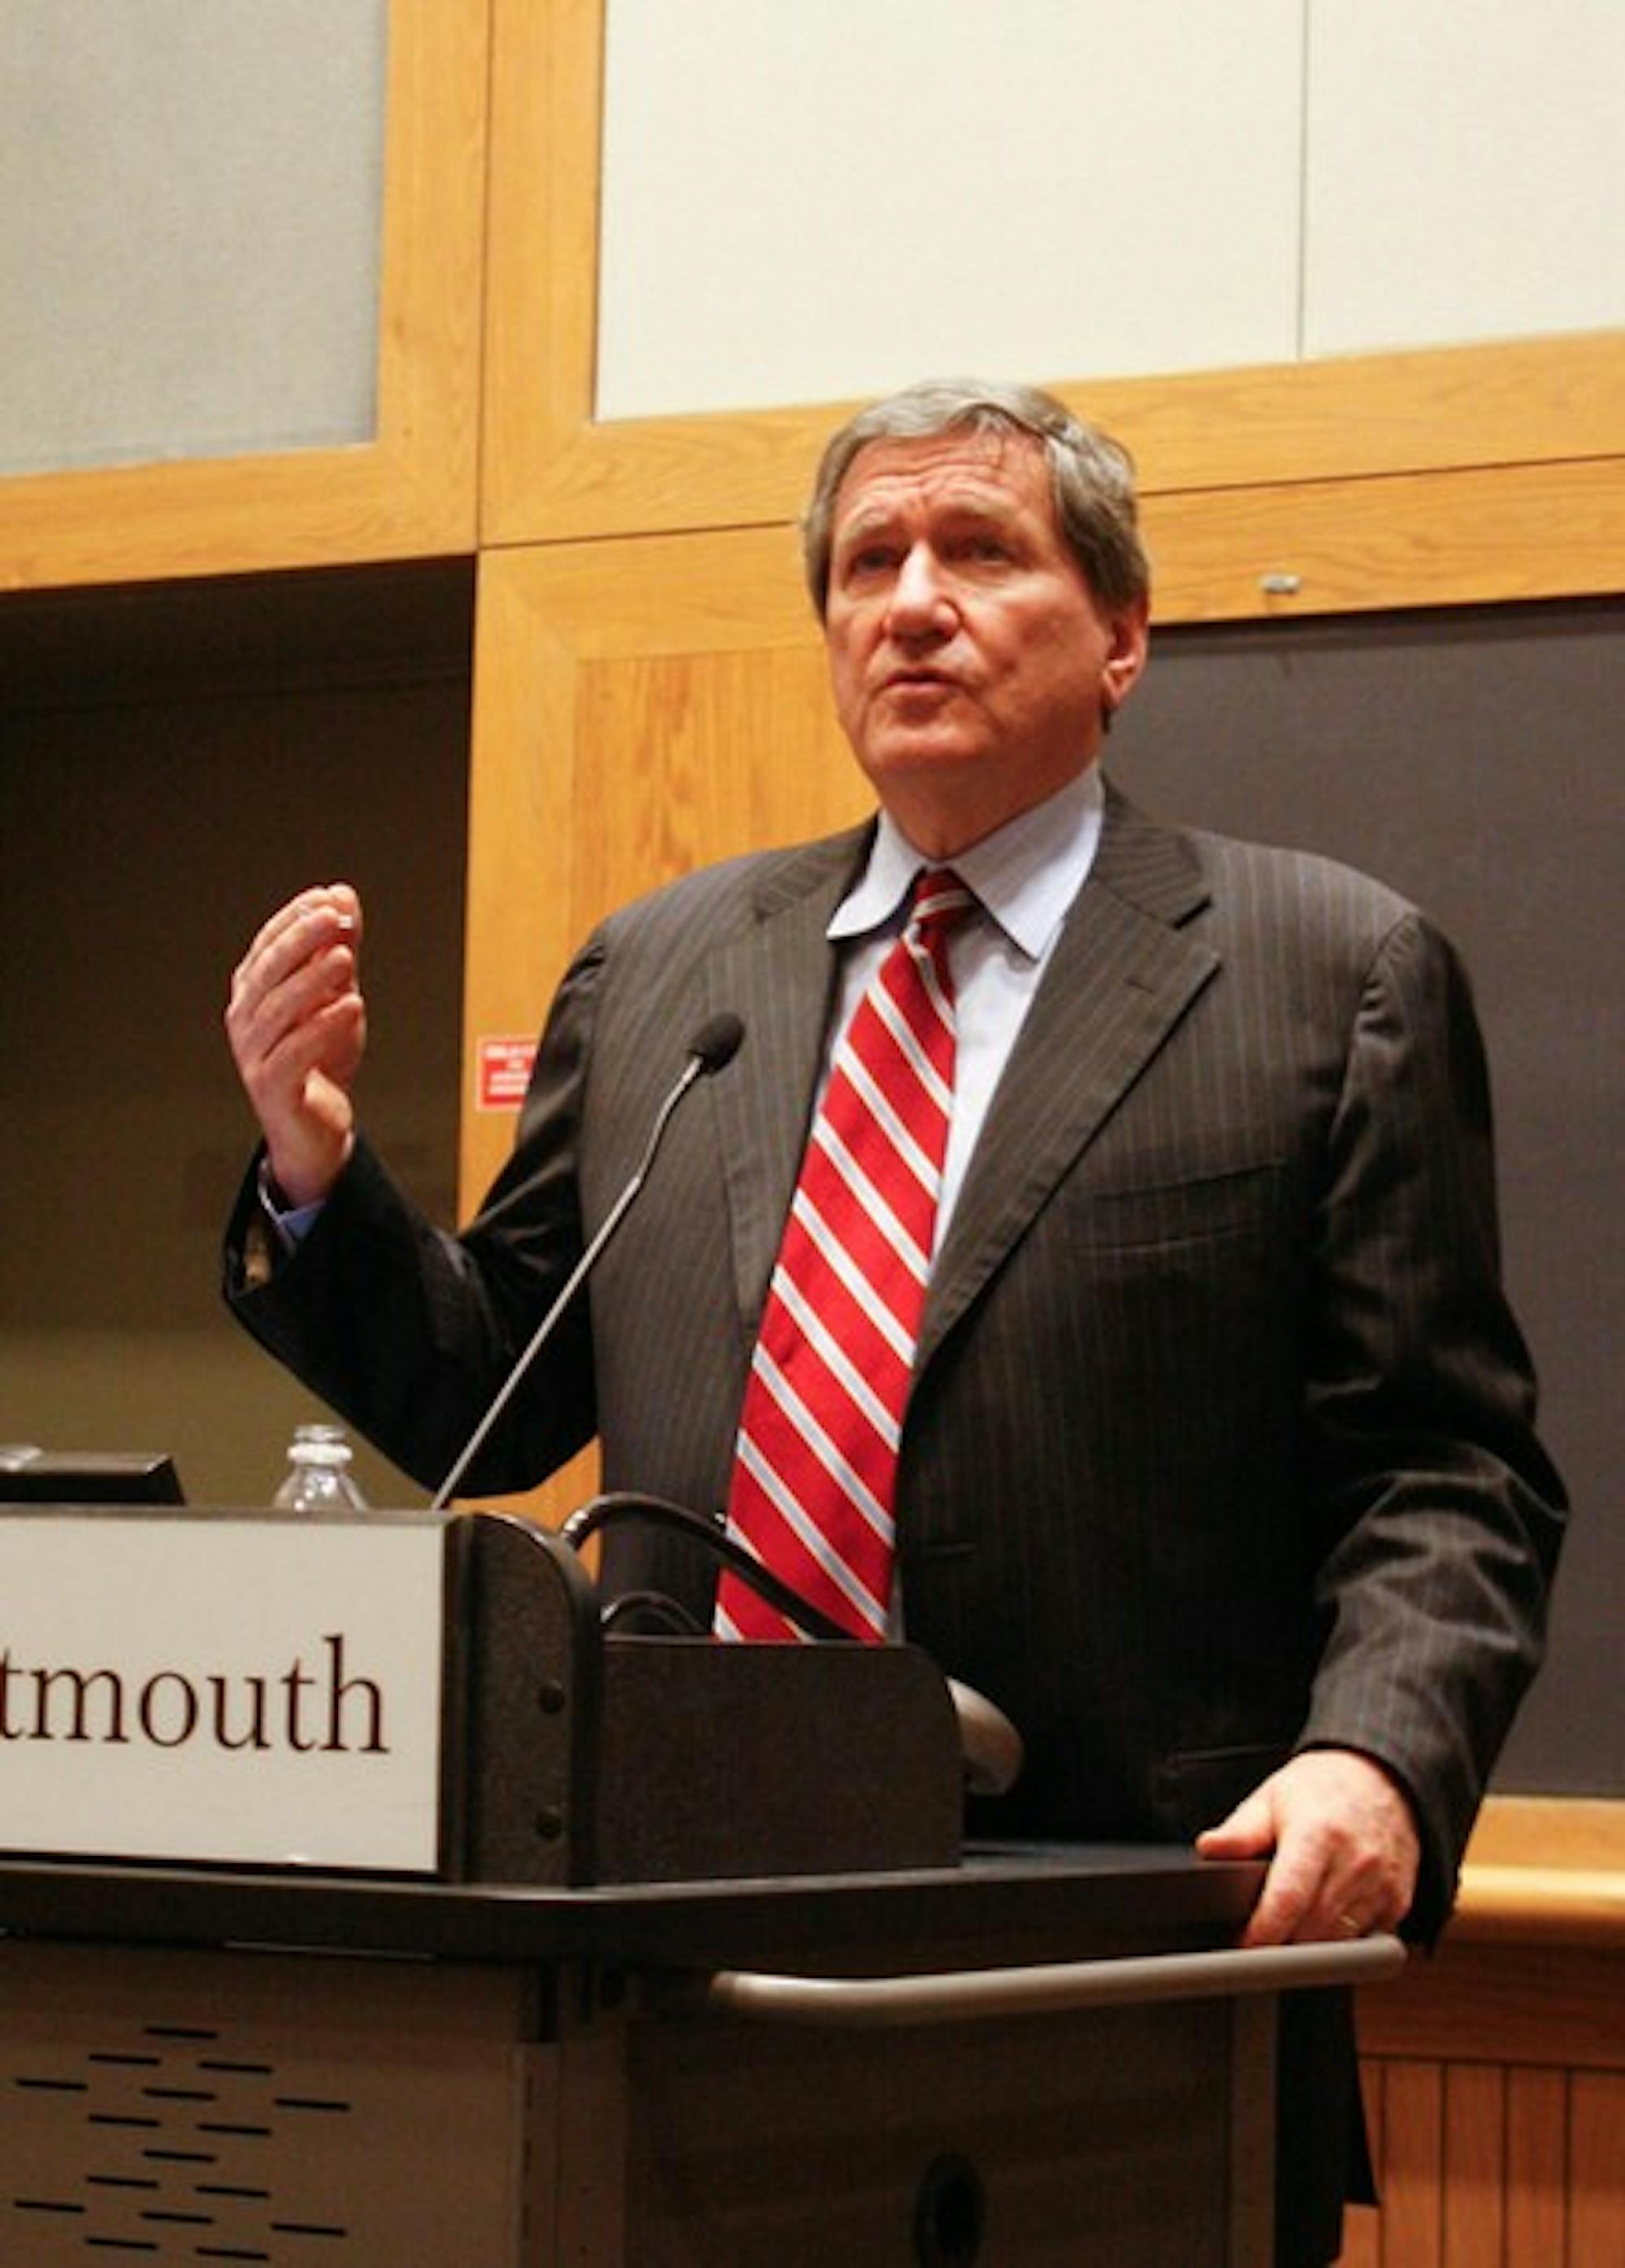 ormer U.S. Ambassador to the United Nations Richard Holbrooke blames America for weakening the United Nations during his Wednesday speech.